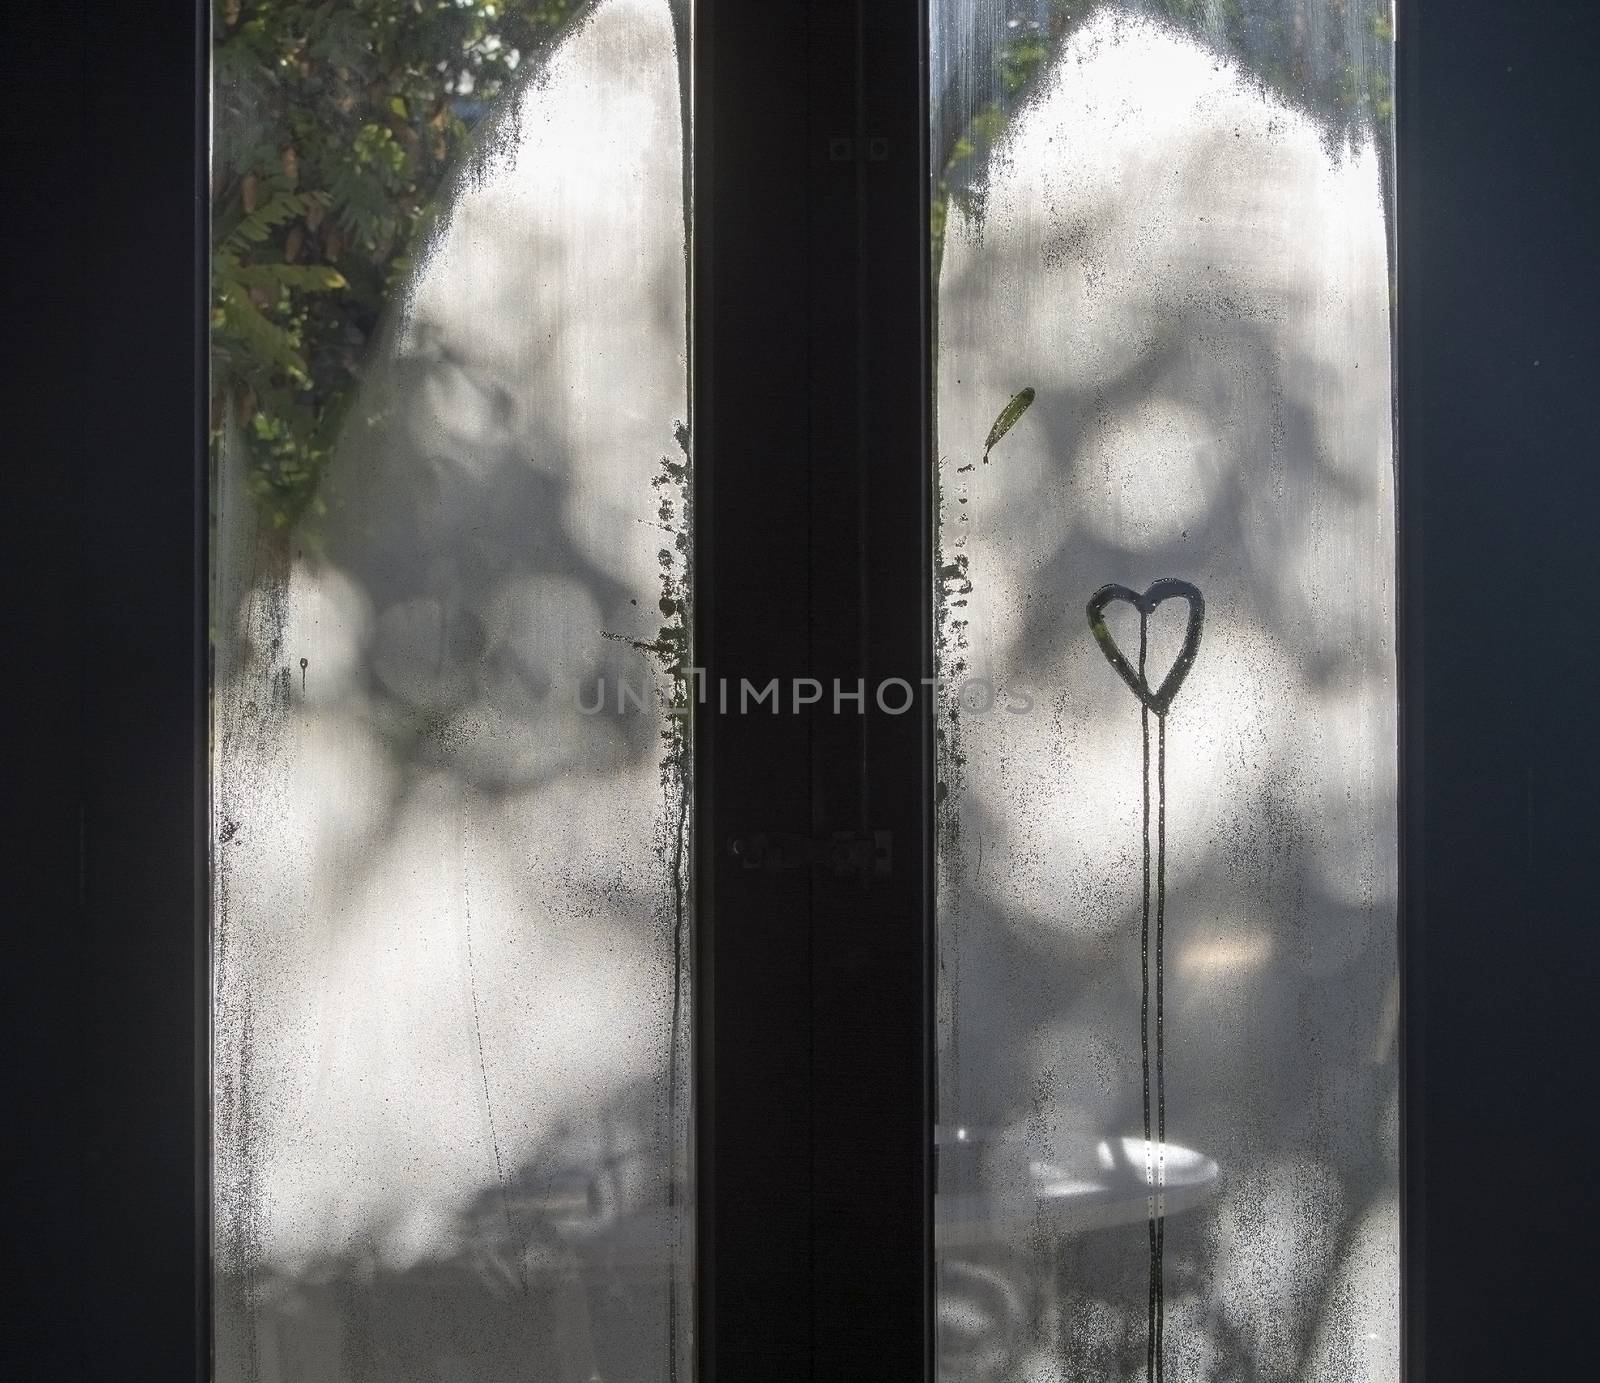 Window dew and drawn heart shape with running drops